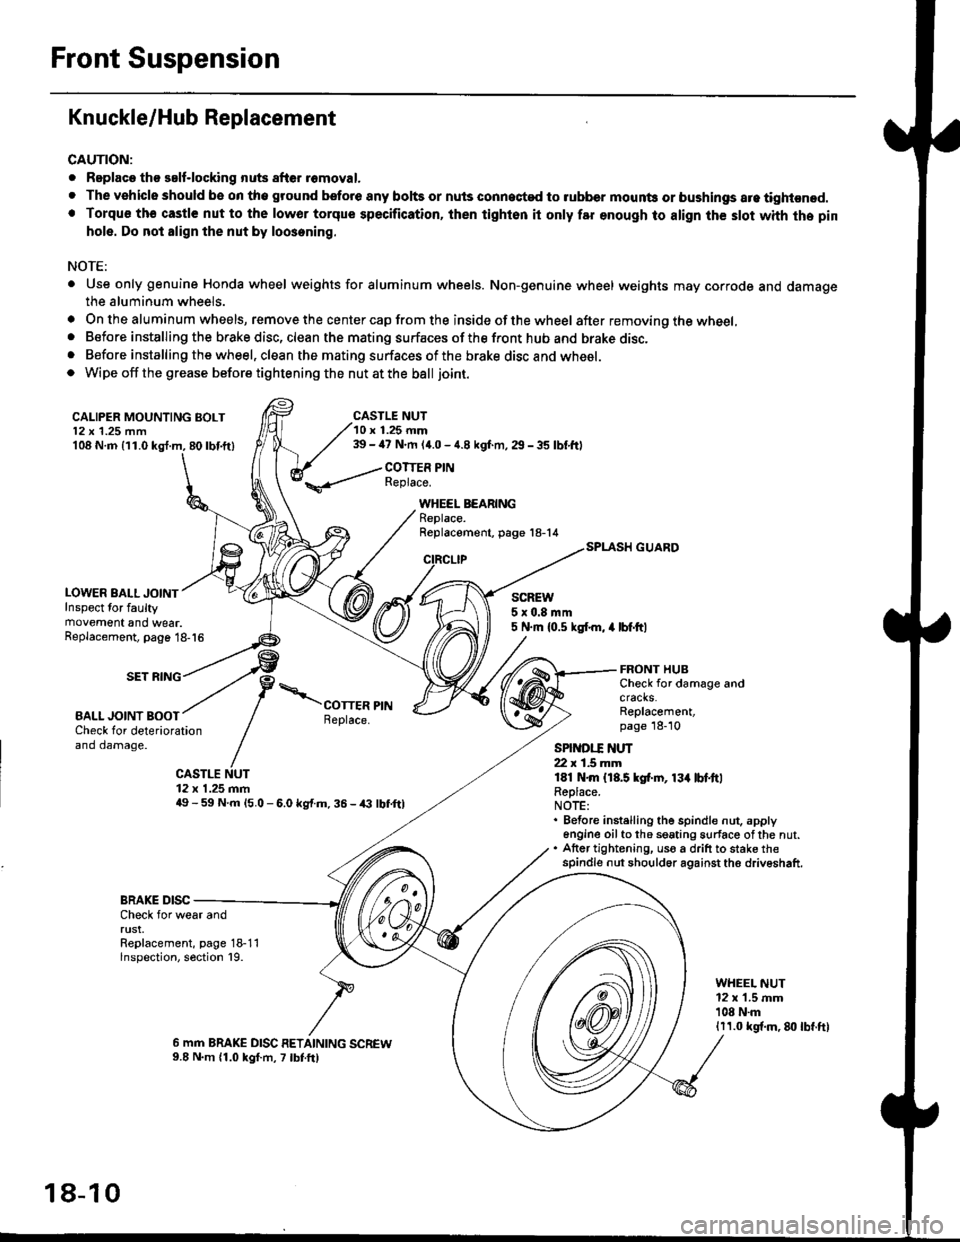 HONDA CIVIC 1996 6.G Workshop Manual Front Suspension
Knuckle/Hub Replacement
CAUTION:
. Replaco tho salf-locking nuts after romoval.
. The vehiclo should be on tho ground bsfore any bohs or nuls connected to rubber mounb or bushings are